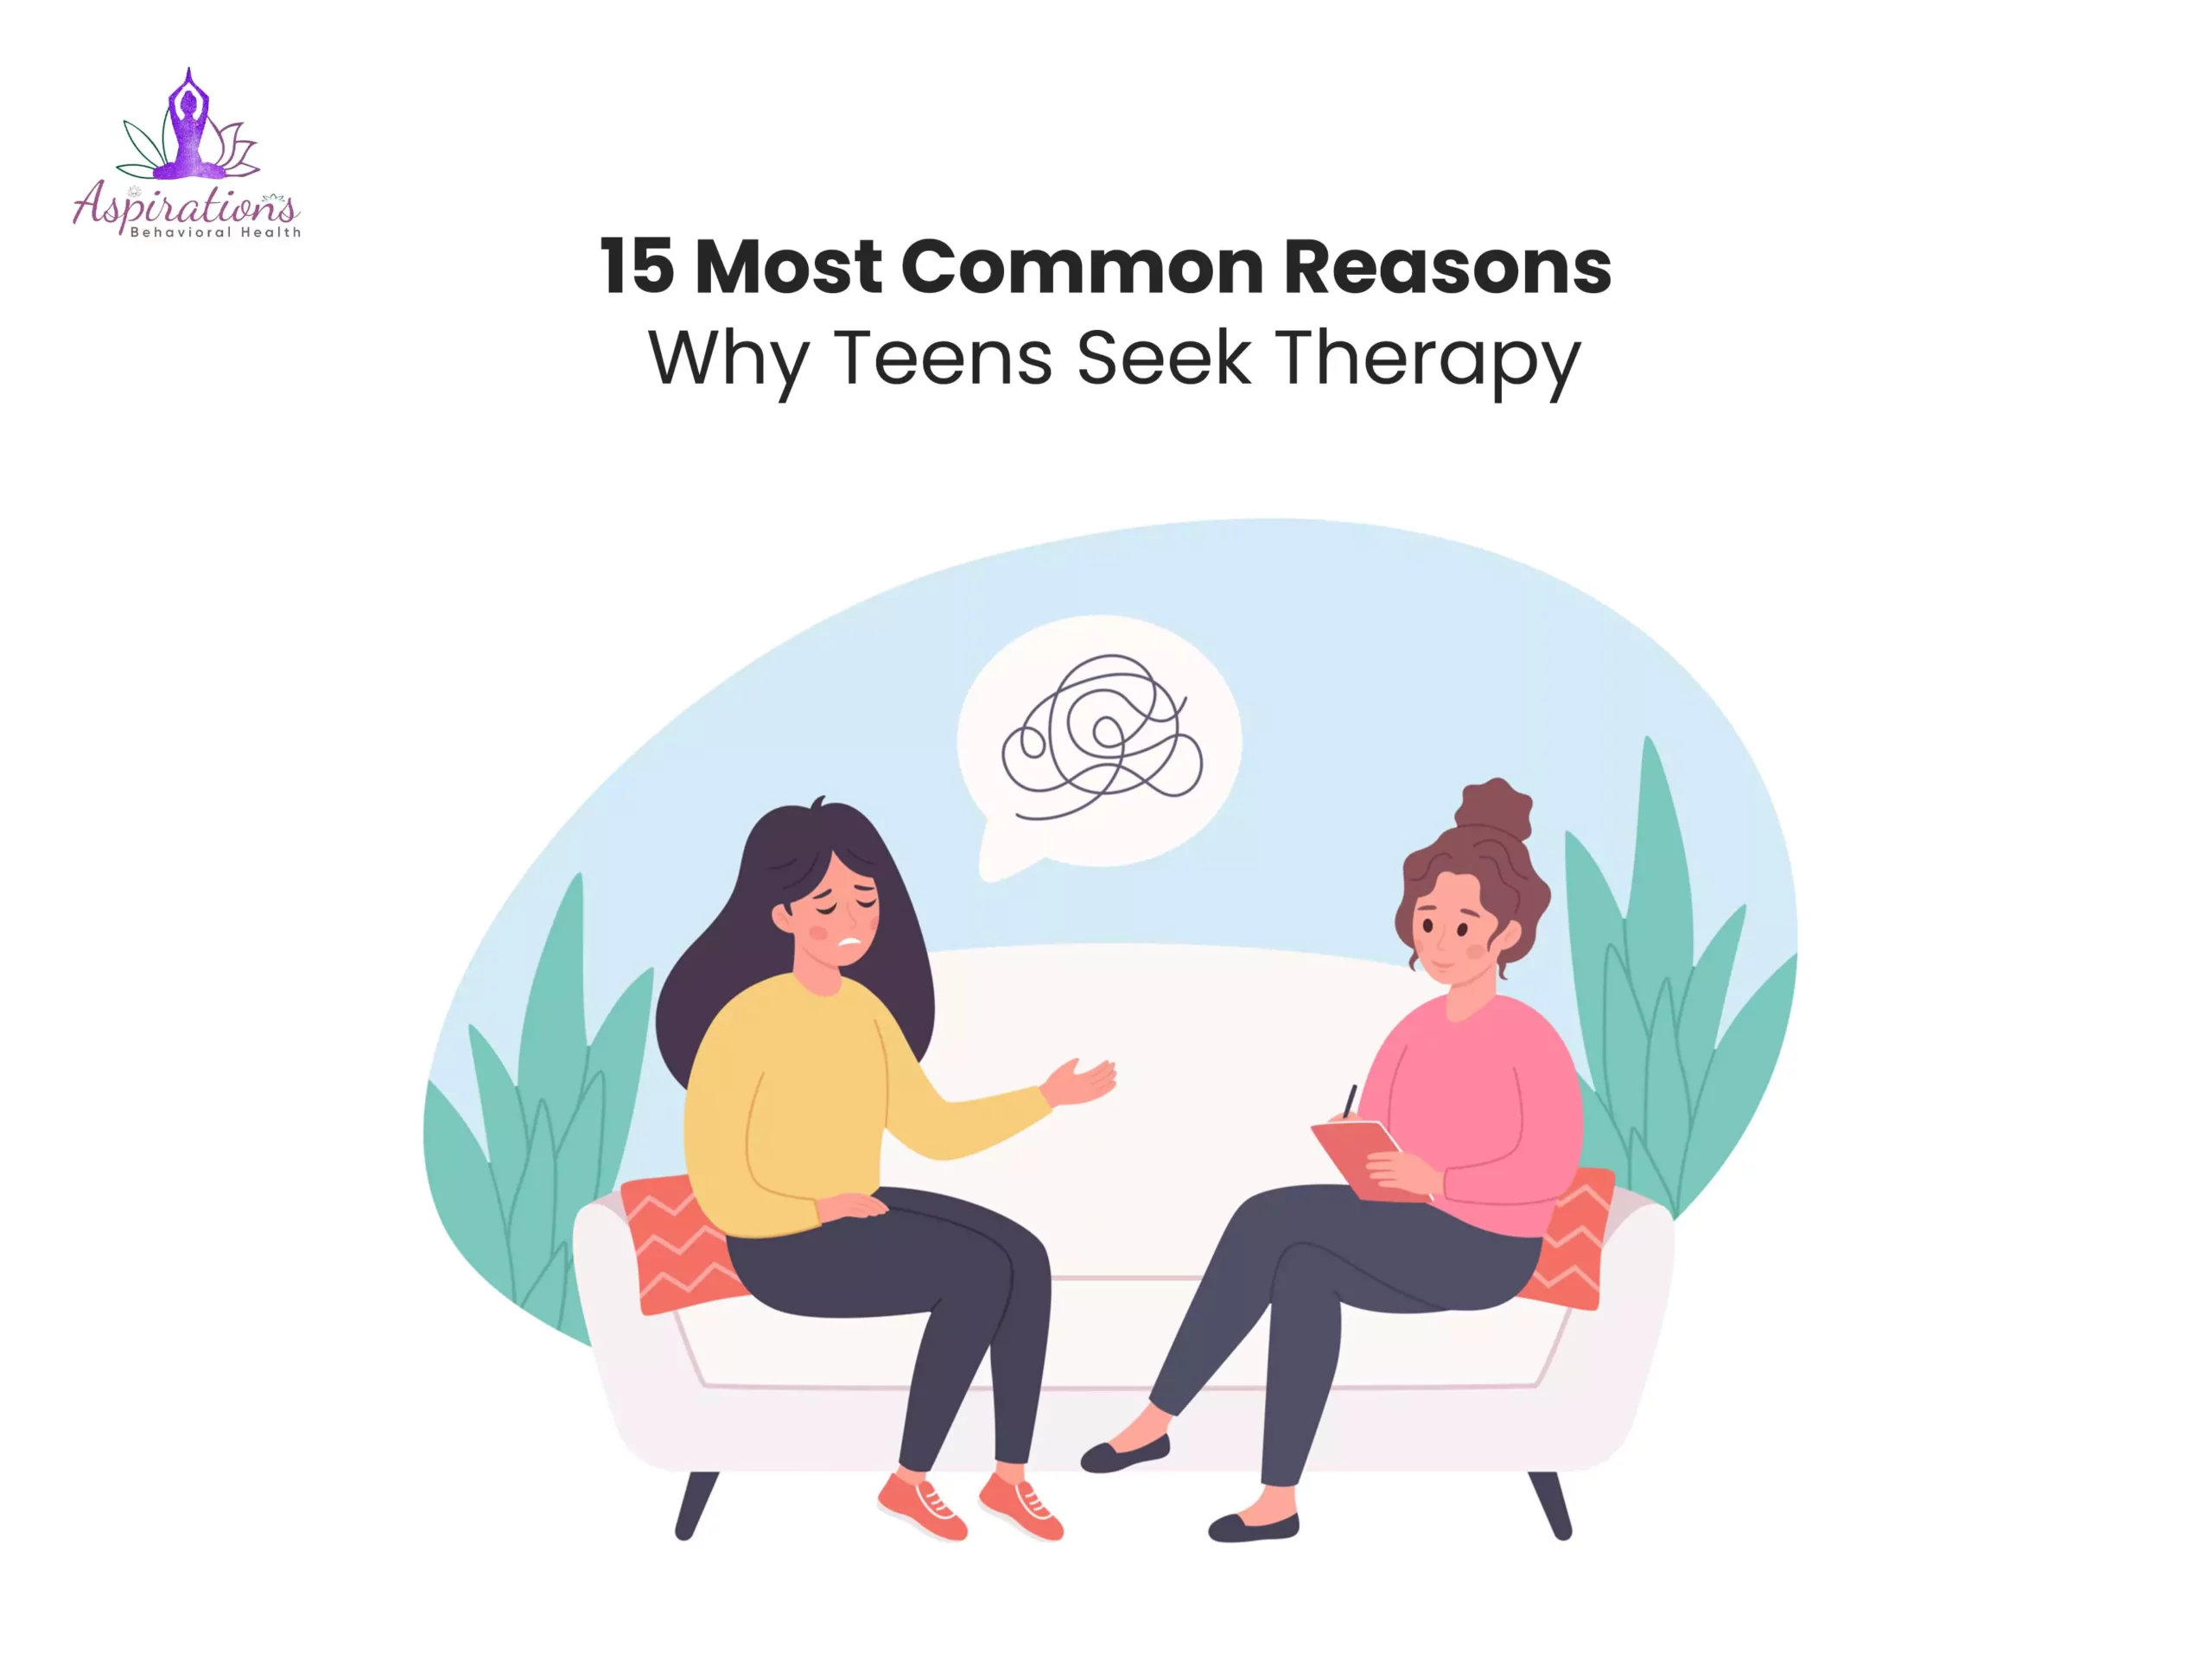 15 Most Common Reasons Why Teens Seek Therapy